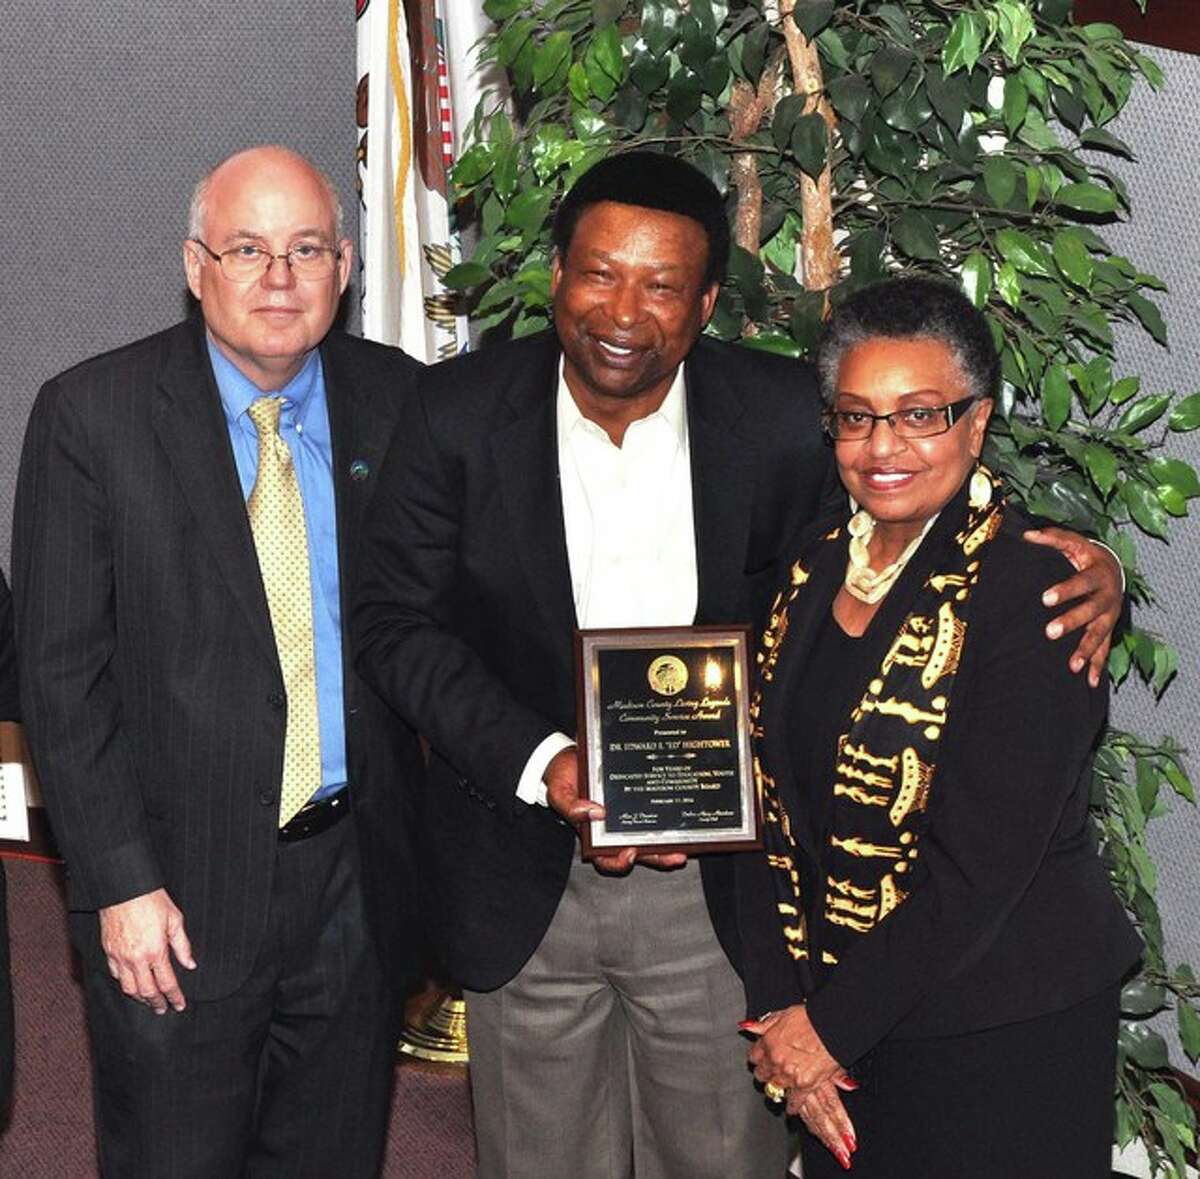 Dr. Ed Hightower, center, with Madison County Board Chairman Alan Dunstan and board member Gussie Glasper.